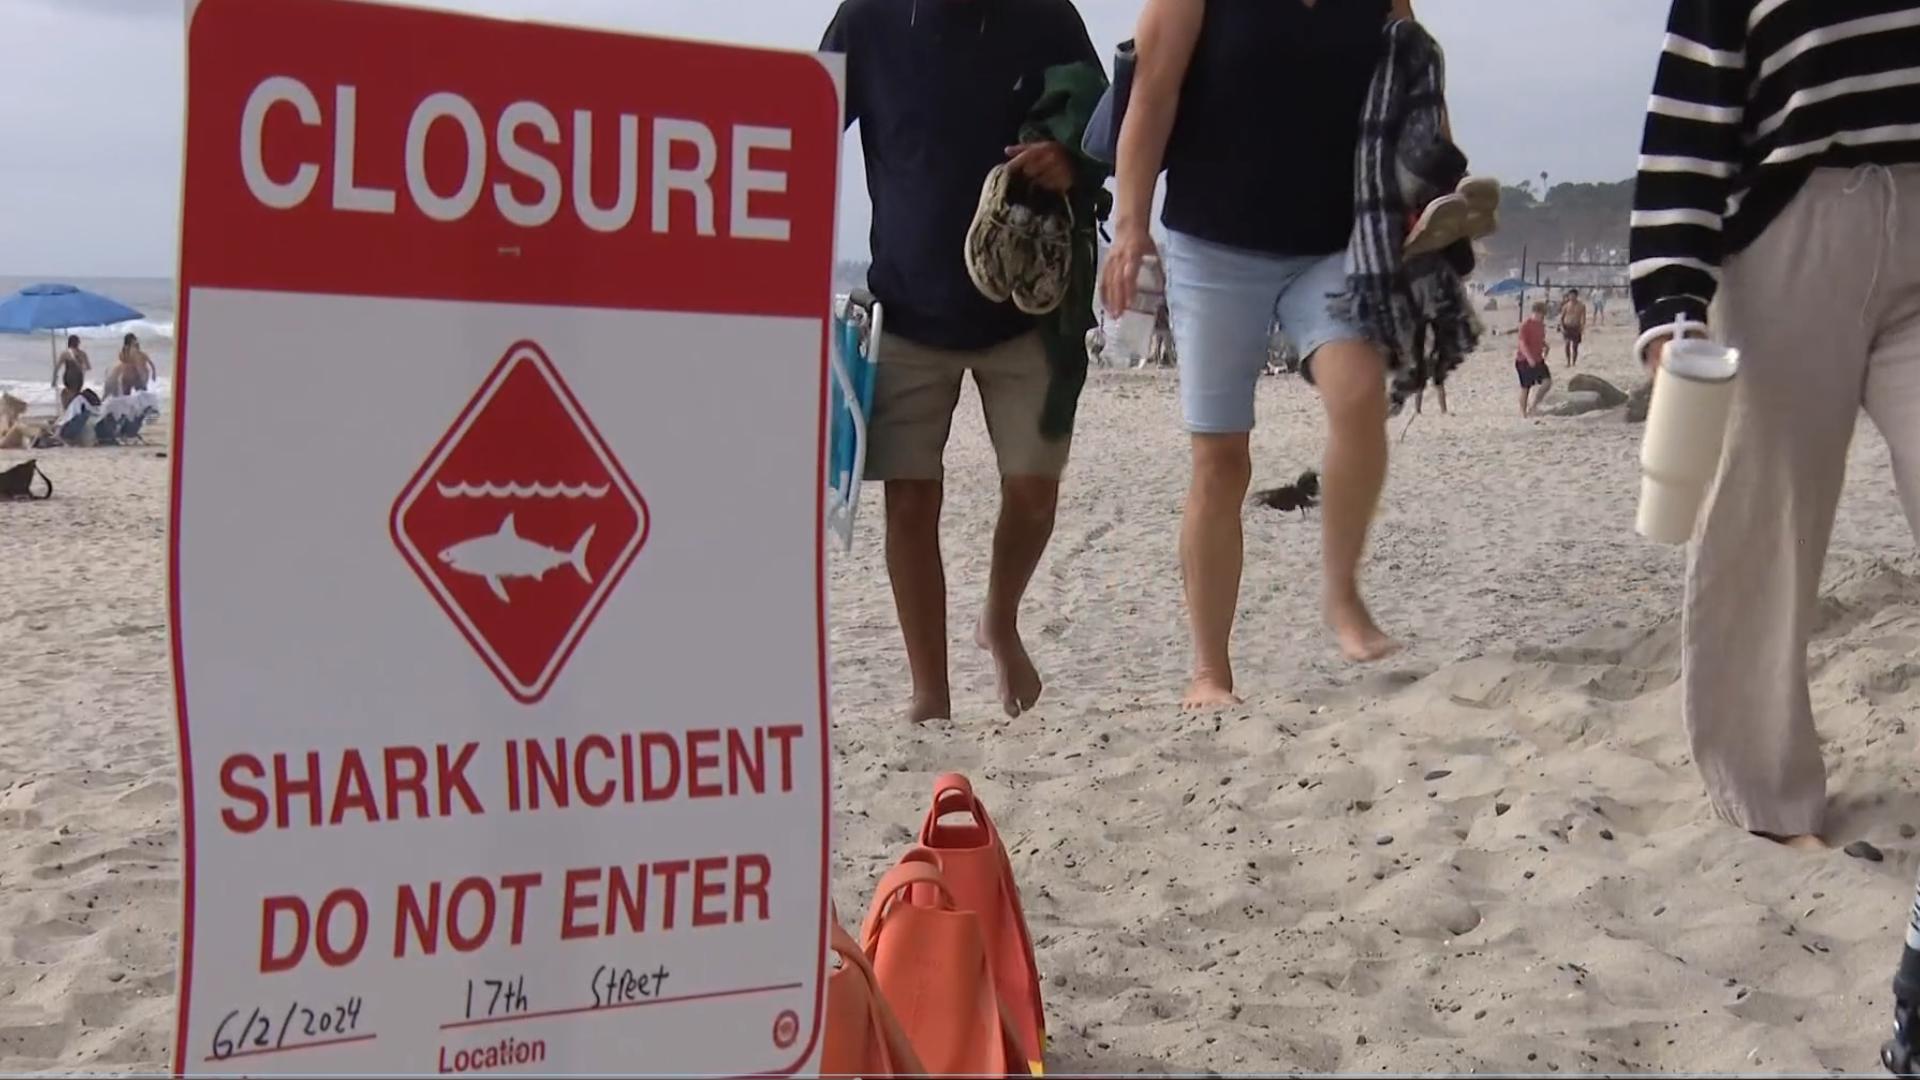 The shark encountered a 46-year-old man at 9 a.m. on Sunday, about 100 yards offshore from the Beach Safety Center at 17th Street, according to city officials.